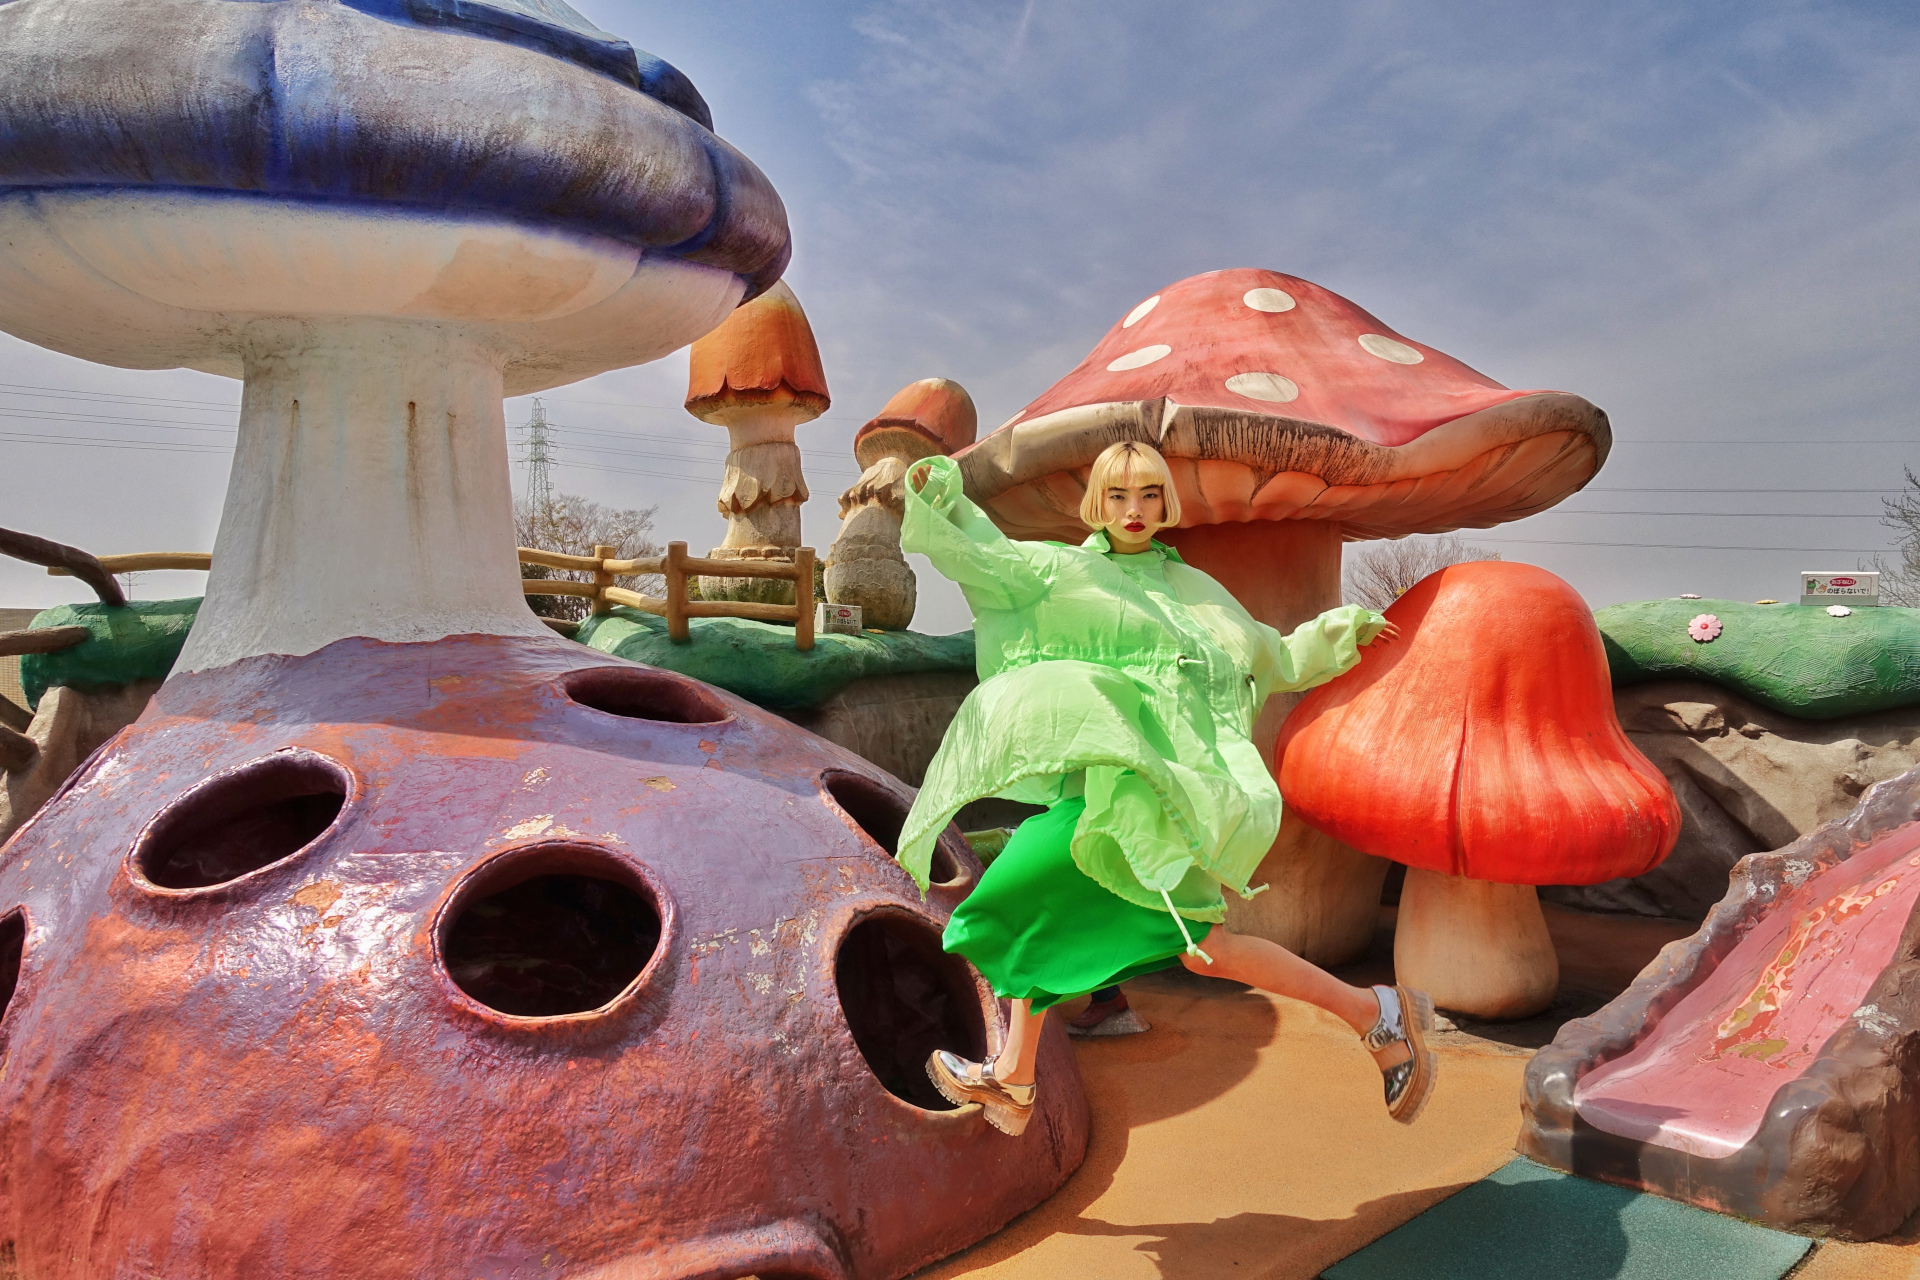 woman in green dress and overshirt jumping on mushroom sculptures